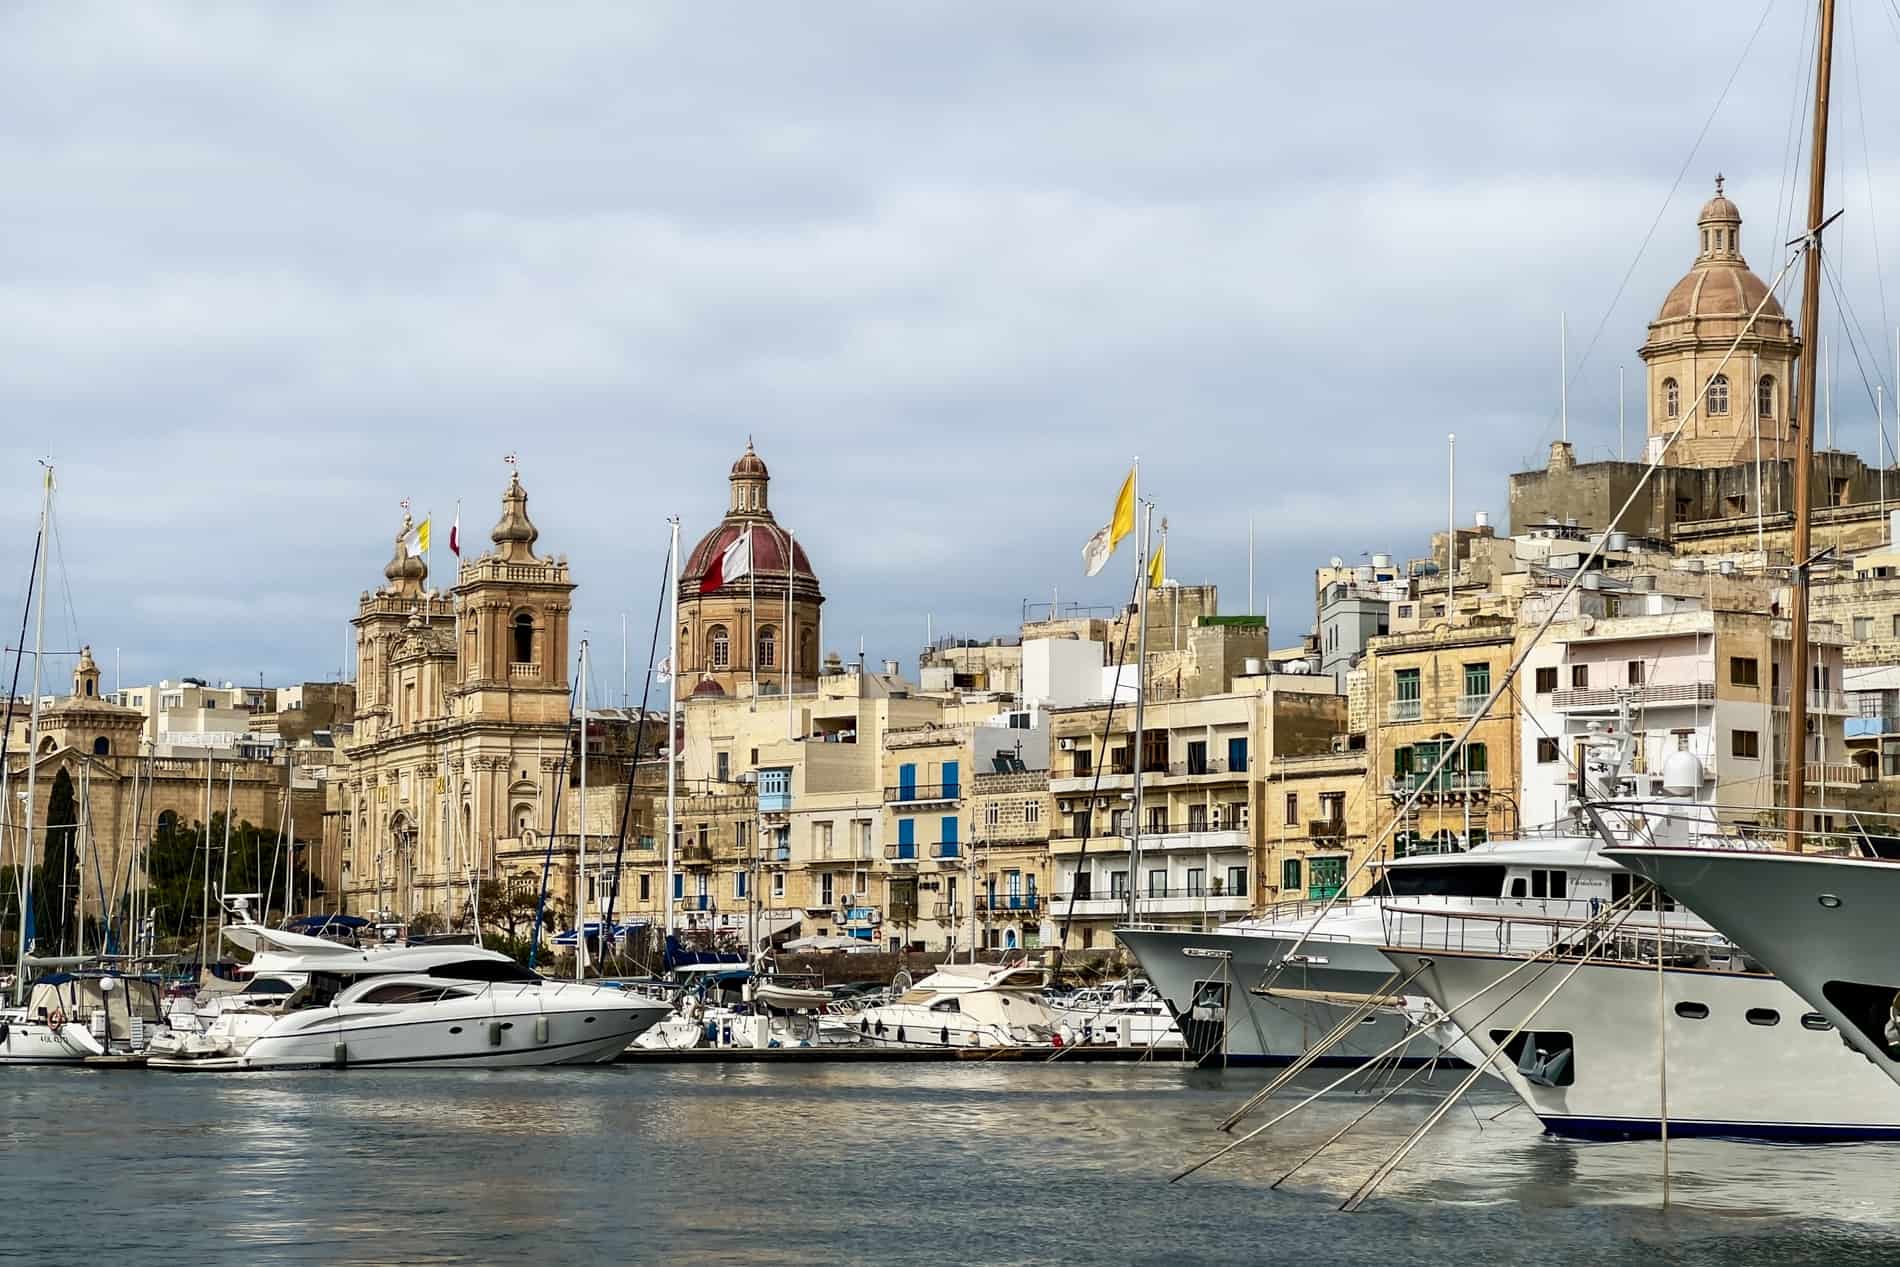 Yachts in the harbour of Vittoriosa, Malta - an opulent old city of golden stone and spires. 